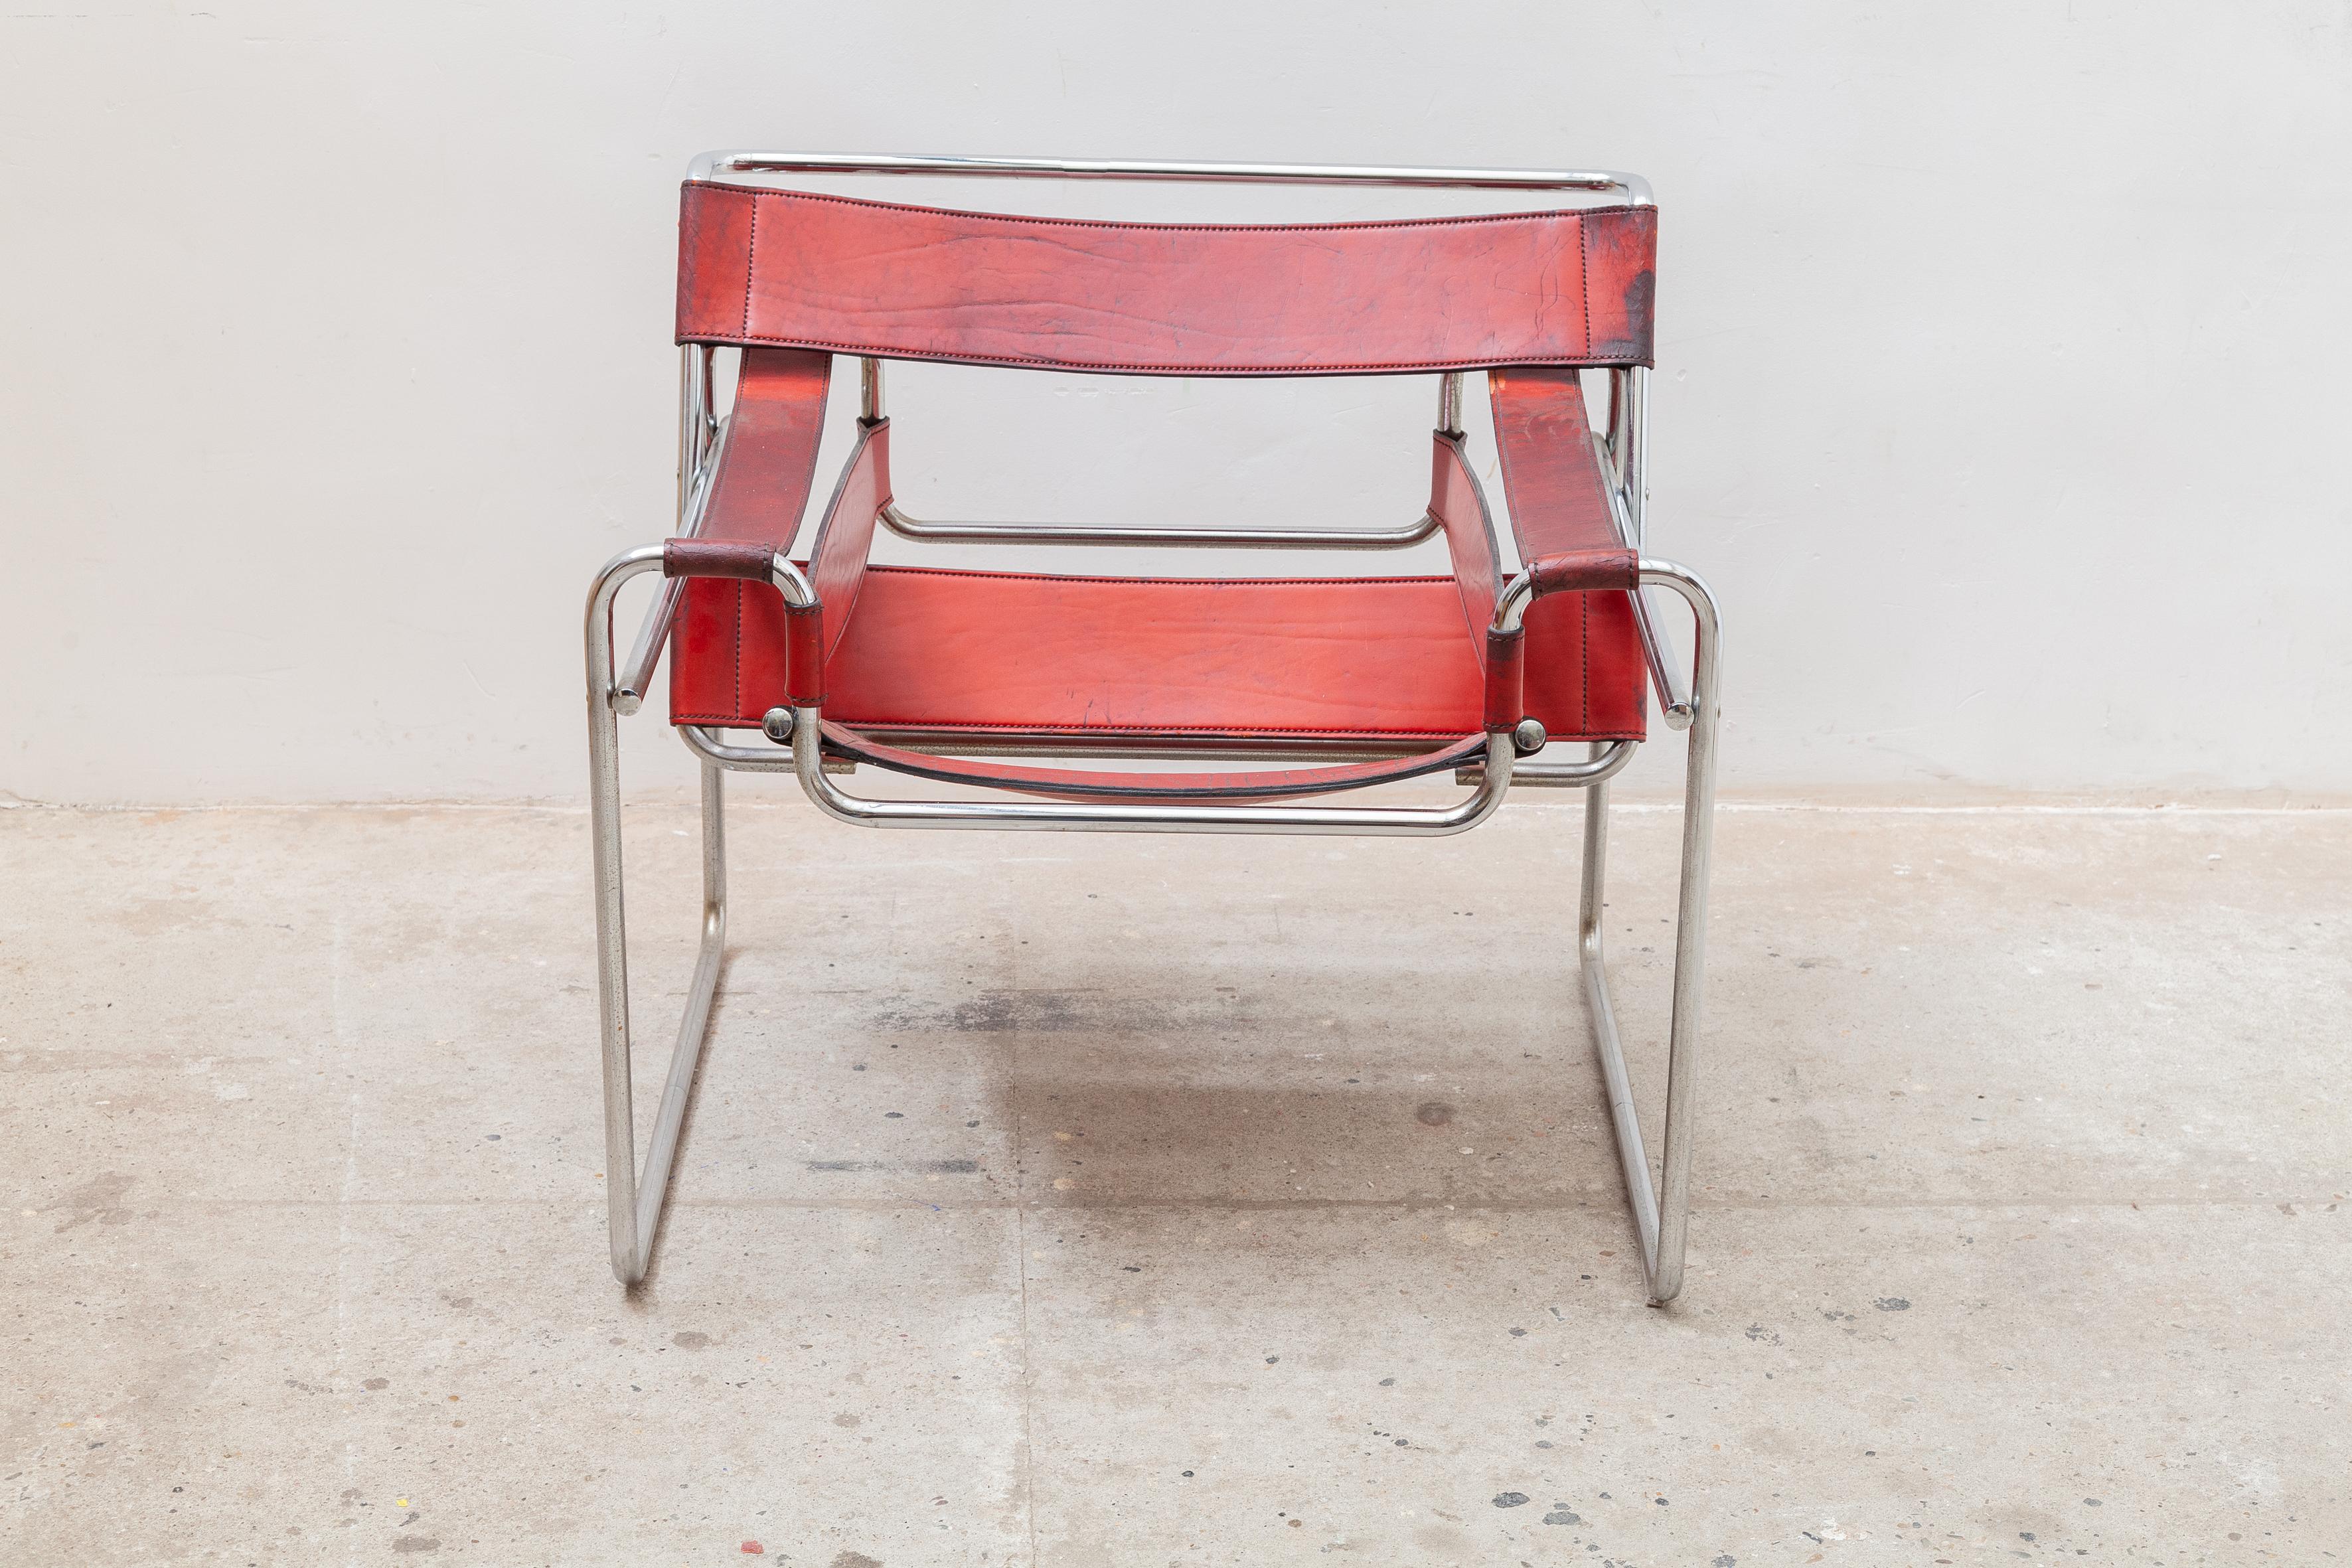 Wassily B3 armchair in red leather, original design from 1925 by Marcel Breuer manufactured in the 1970s. Polished chrome metal tubular frame and original armrests, back and seat. The leather is in good condition with some wear from use with a nice